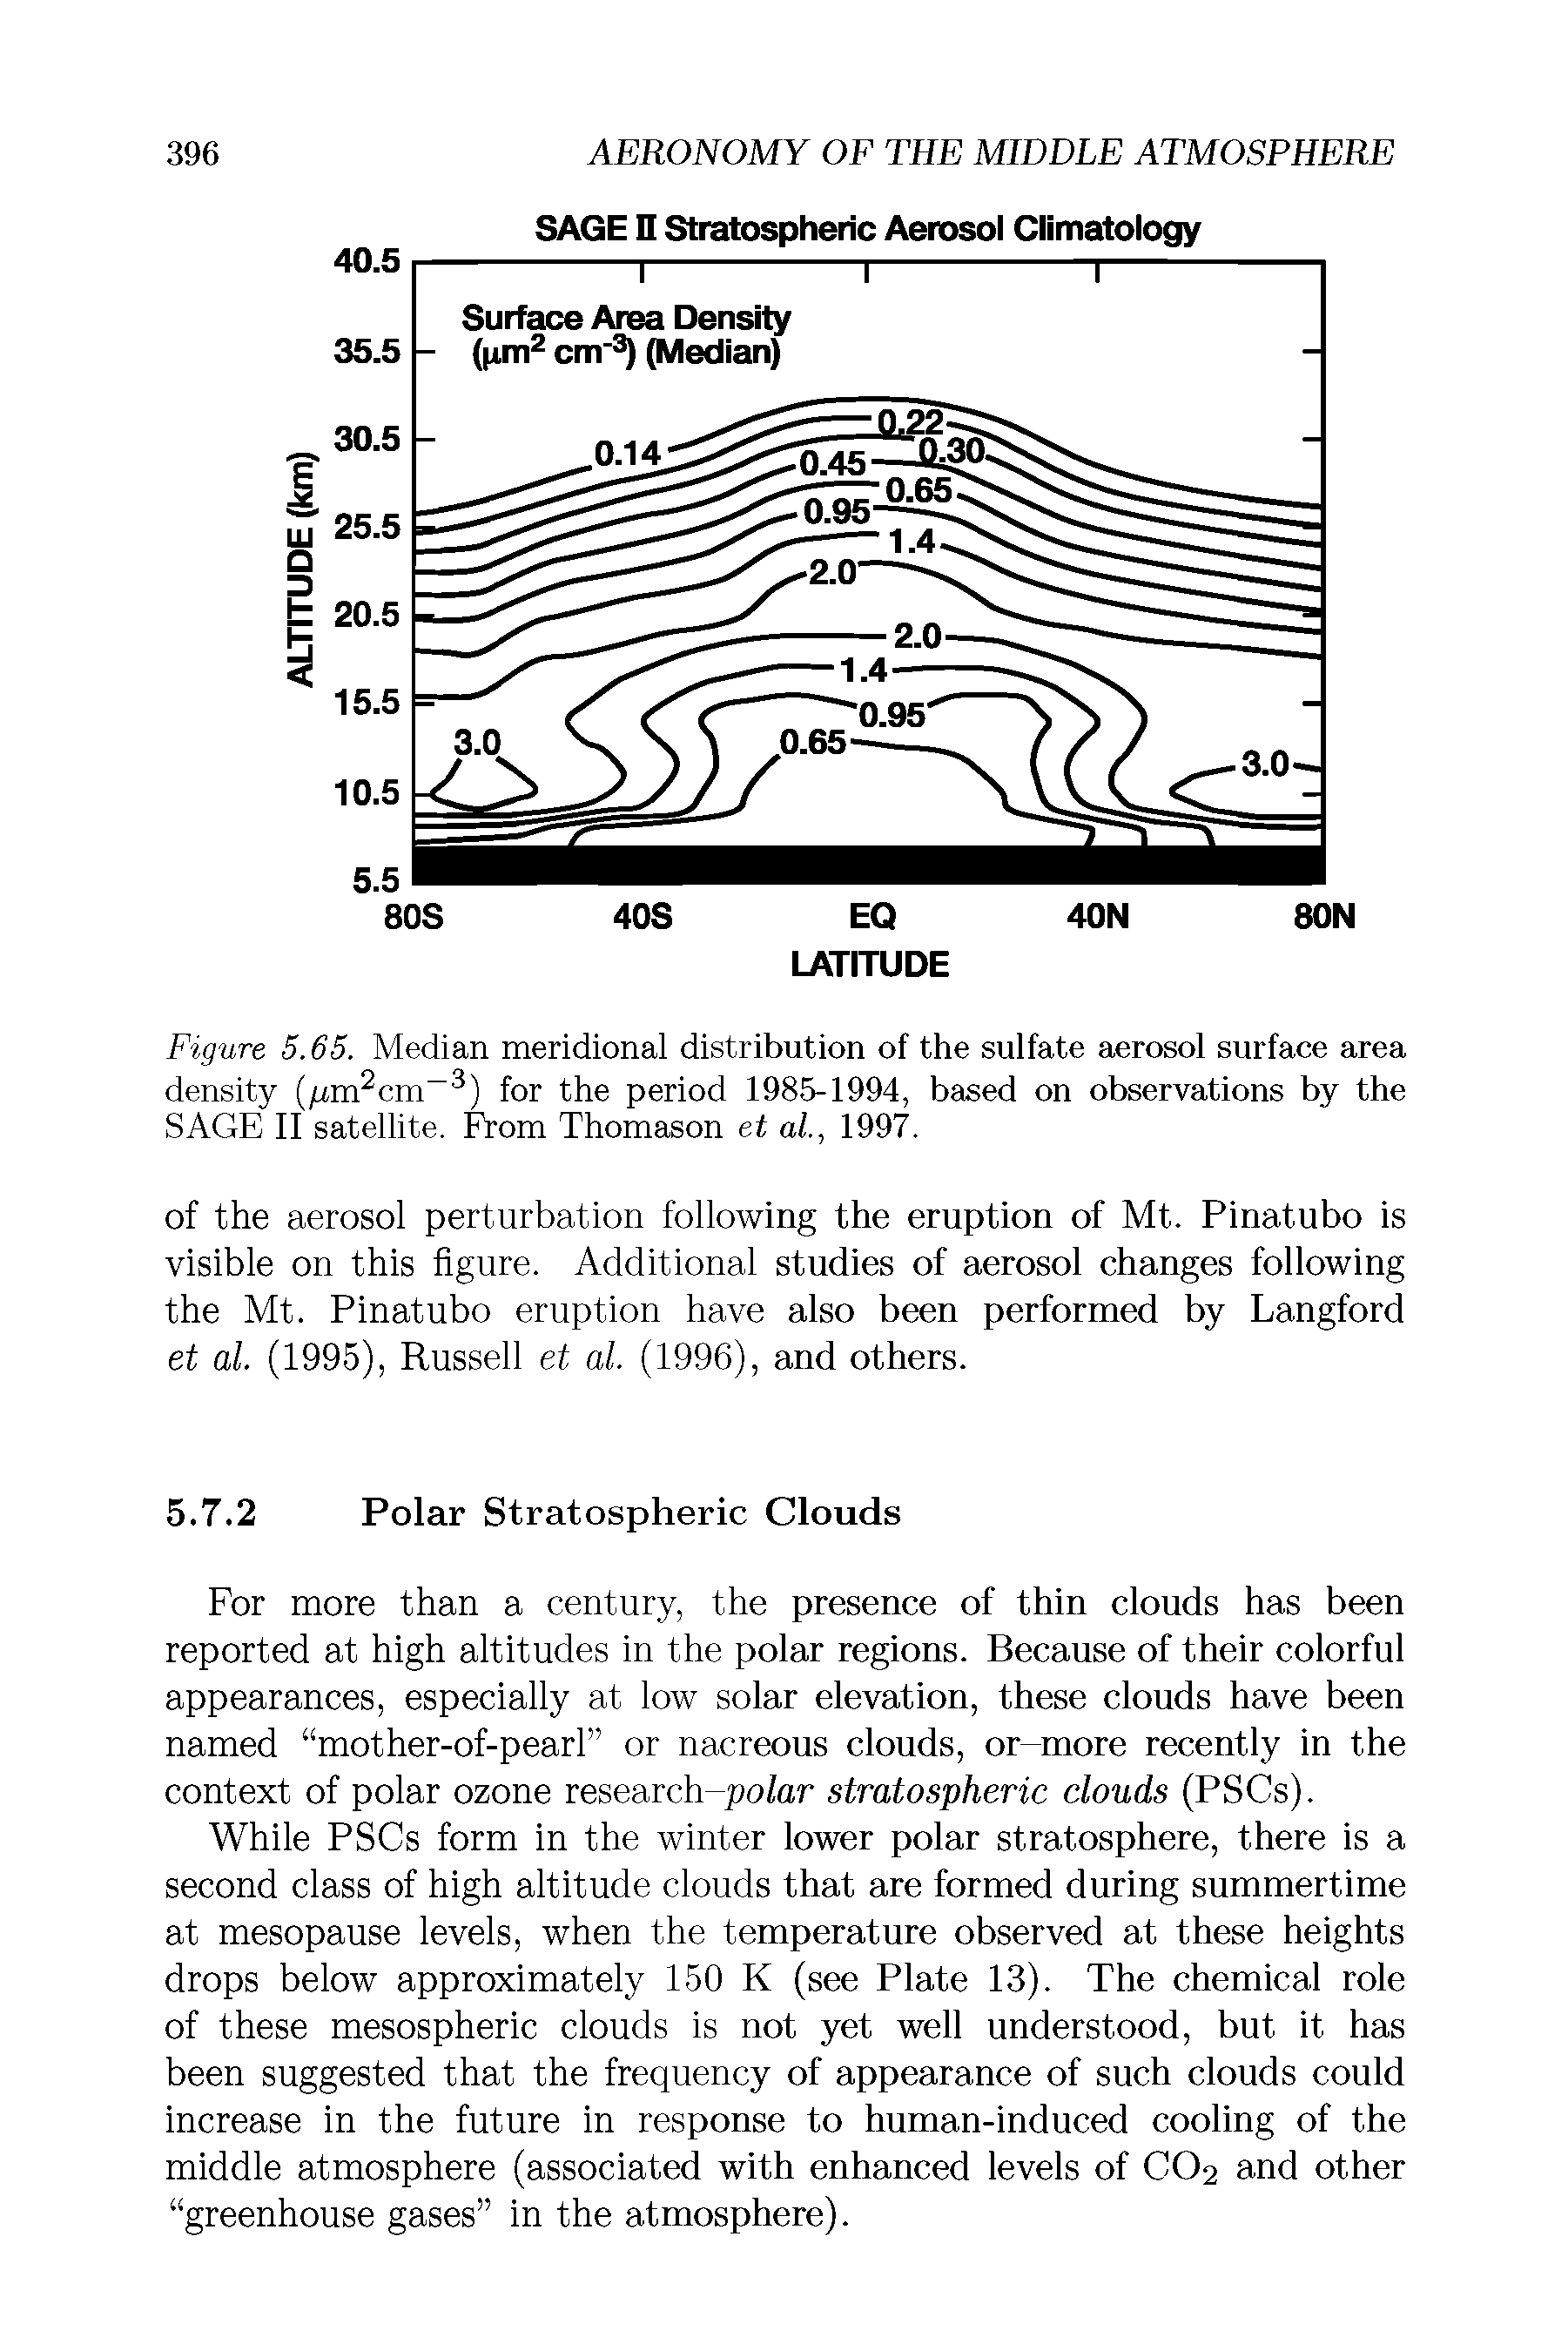 Figure 5.65. Median meridional distribution of the sulfate aerosol surface area density (/im2cm-3) for the period 1985-1994, based on observations by the SAGE II satellite. From Thomason et al, 1997.